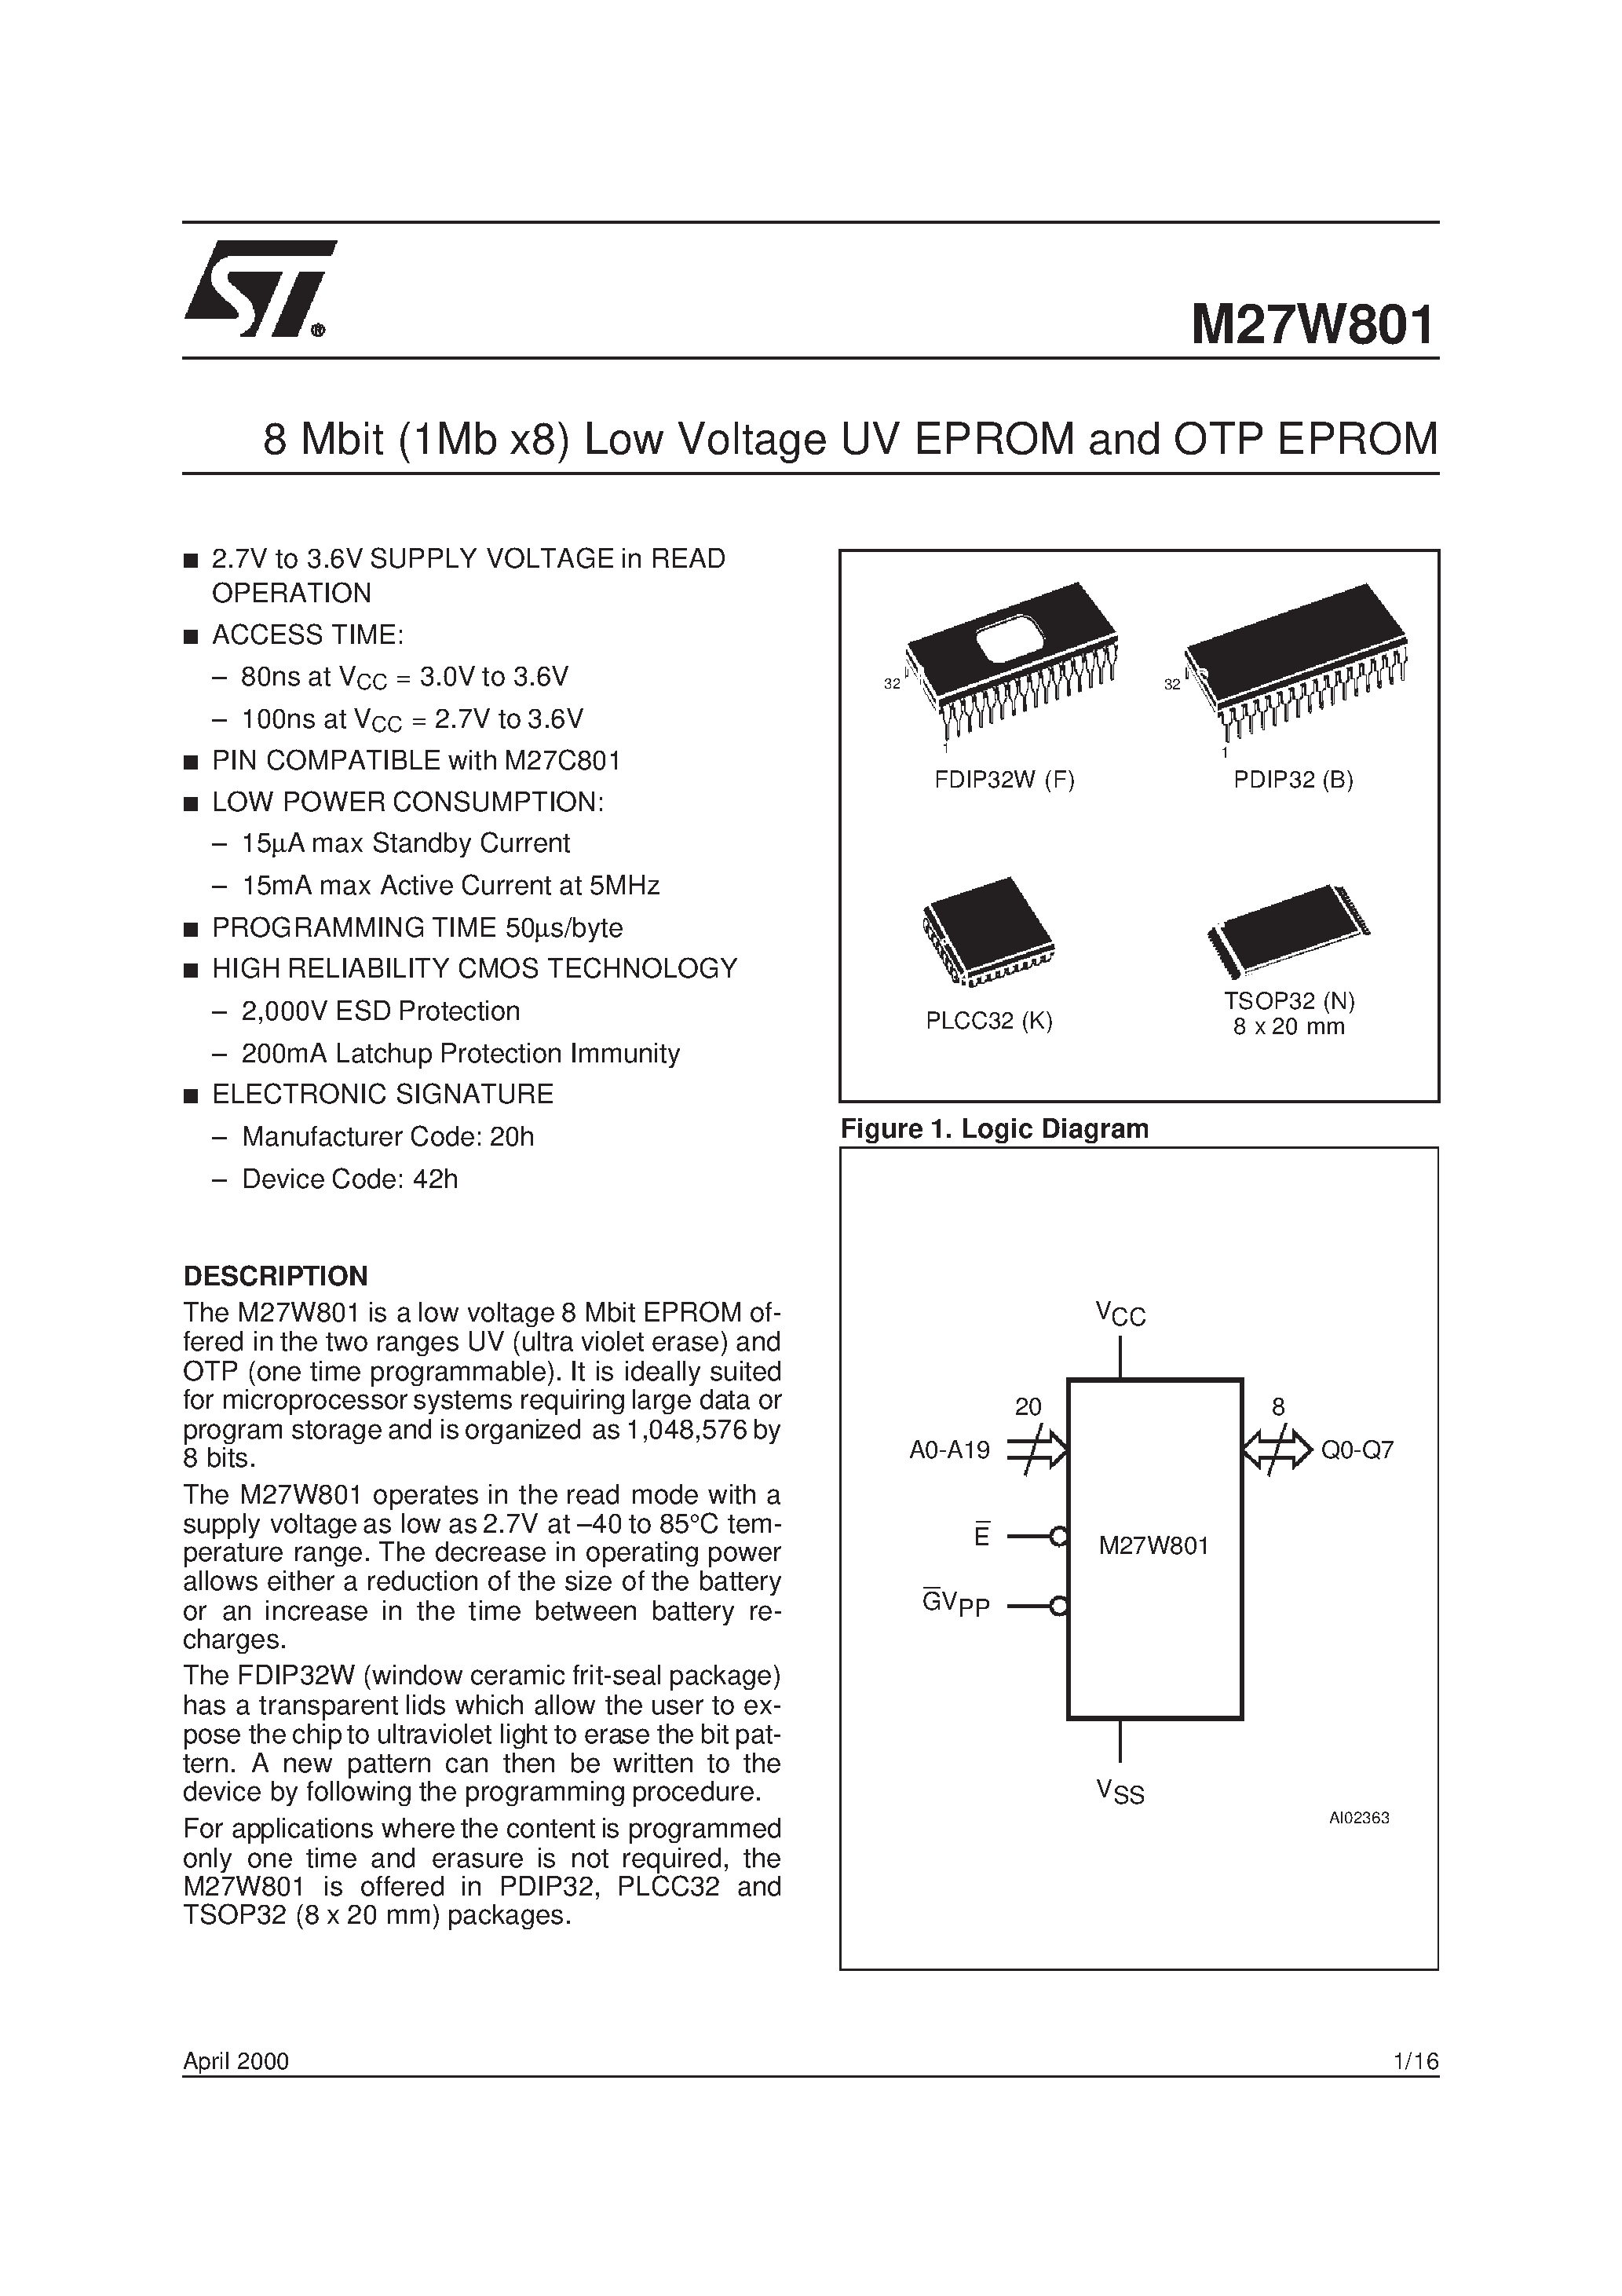 Datasheet M27W801-100K6TR - 8 Mbit 1Mb x8 Low Voltage UV EPROM and OTP EPROM page 1